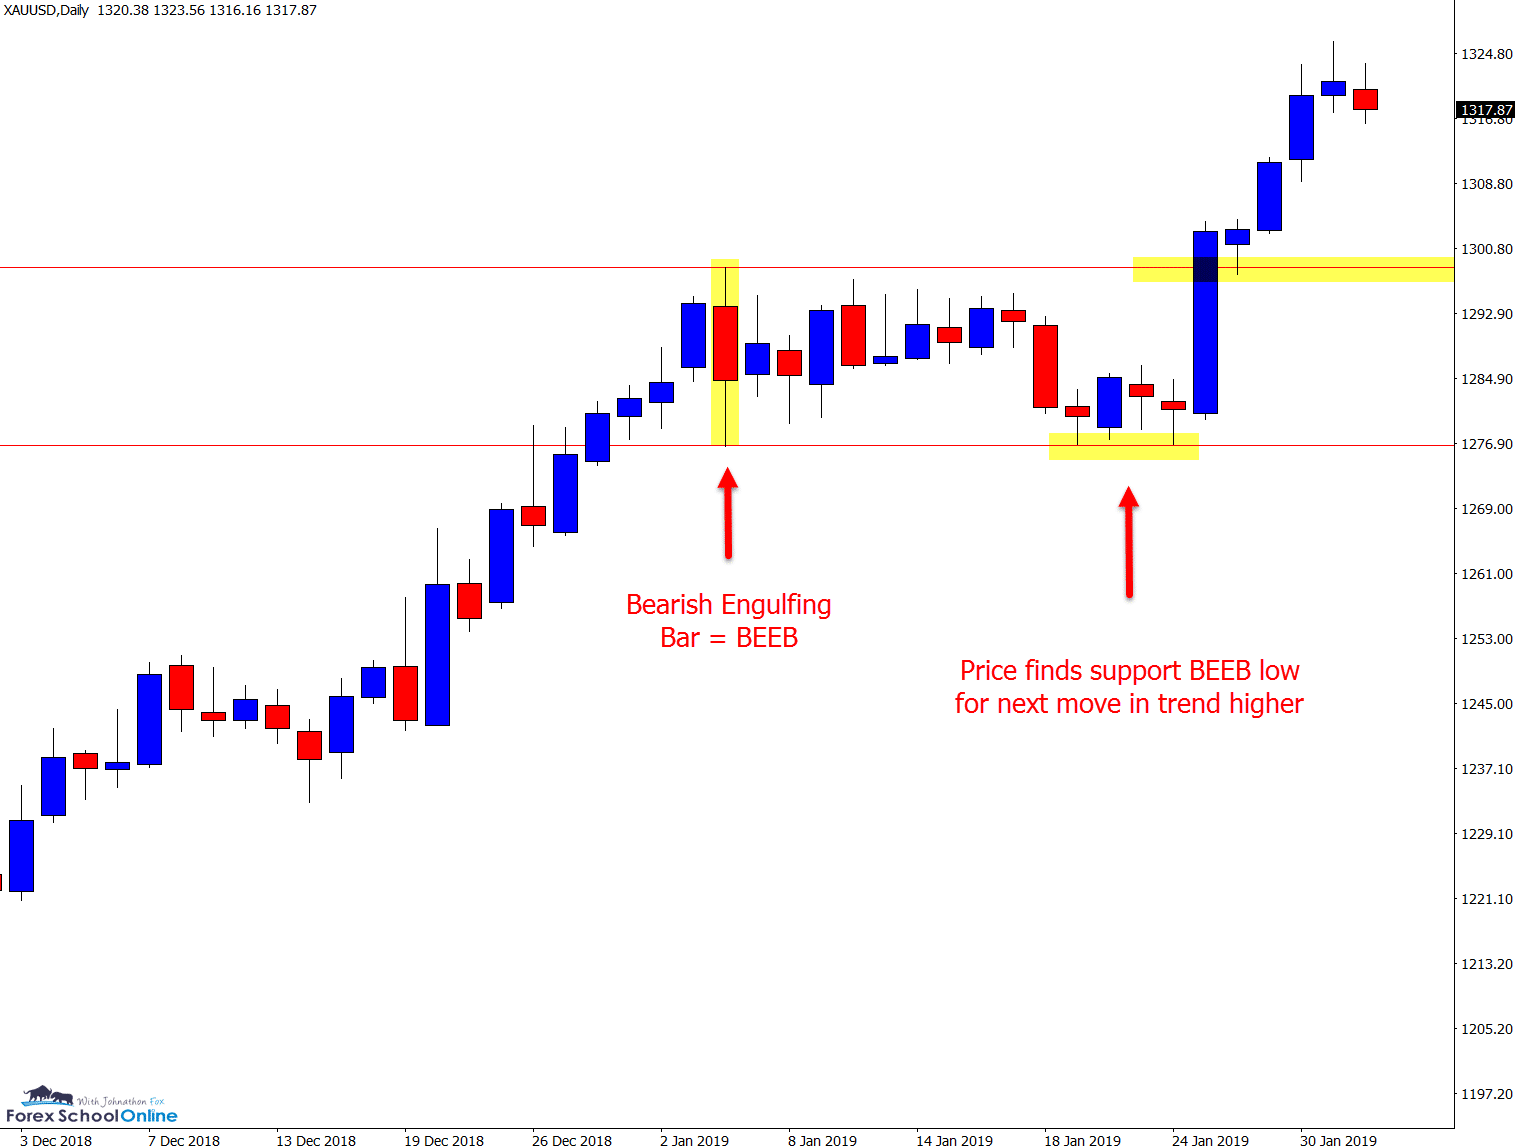 Gold price action